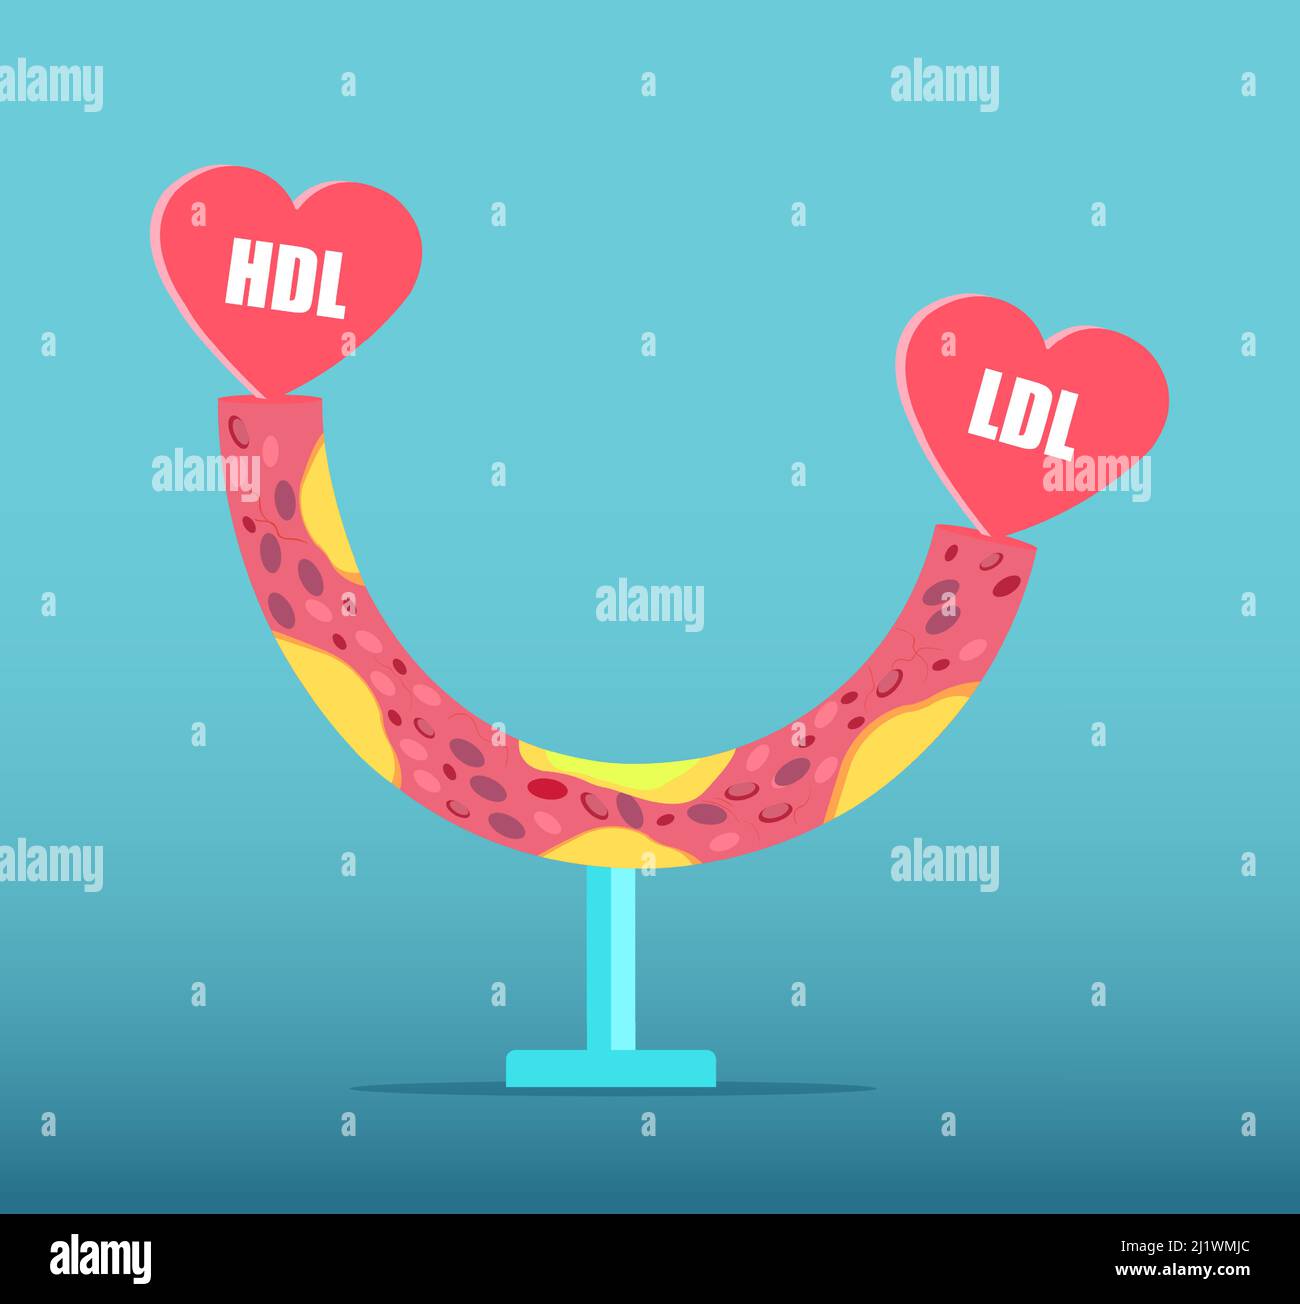 Vector of a blood vessel with atherosclerotic plaques in a patient with HDL and LDL misbalance Stock Vector